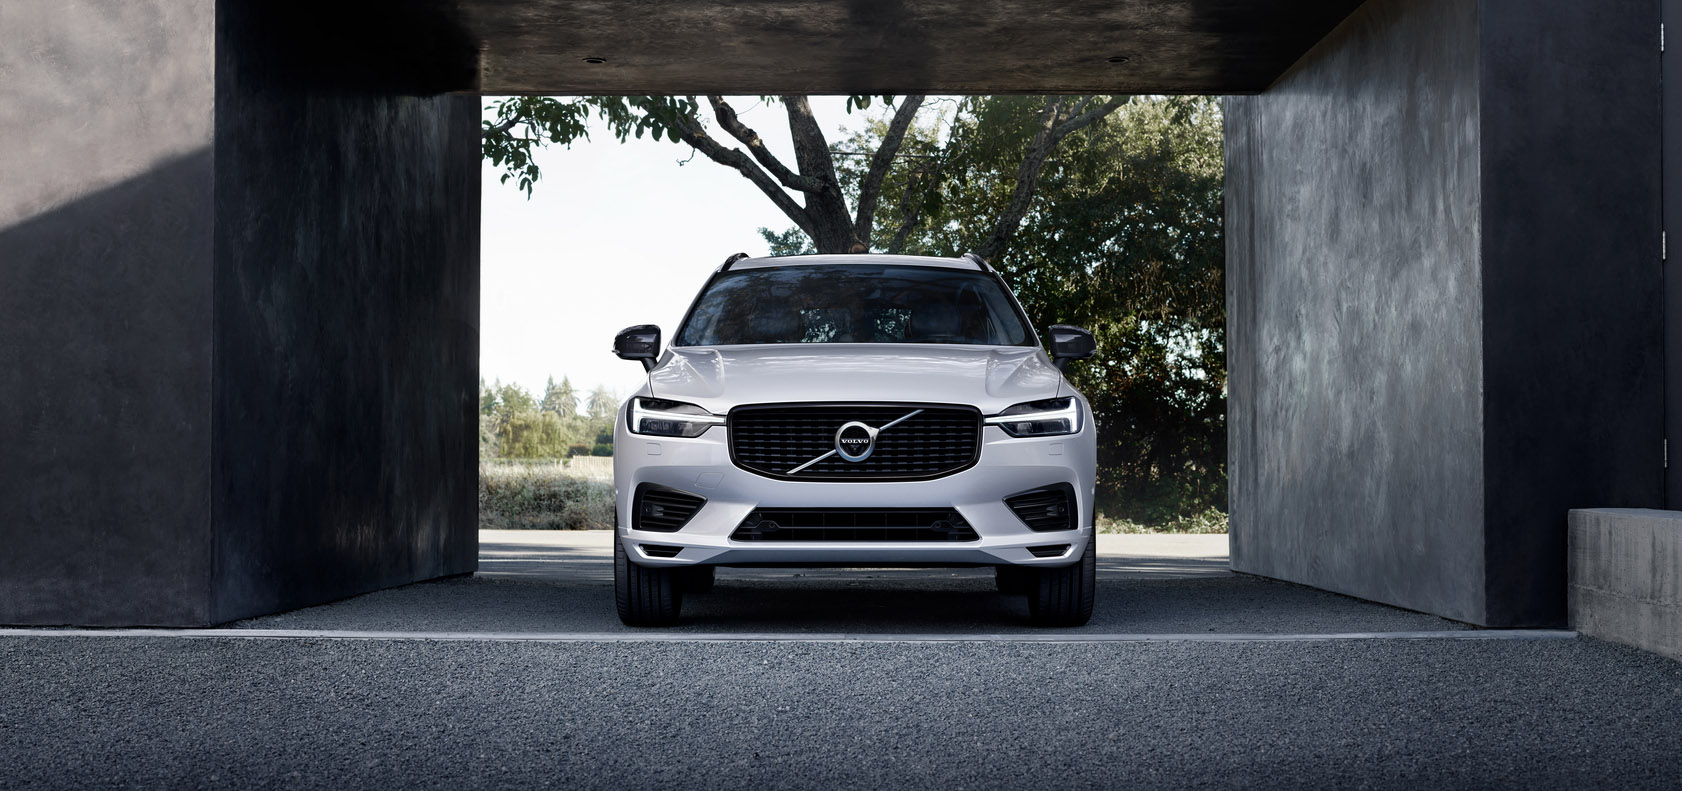 A white Volvo XC60 is parked next to a concrete building